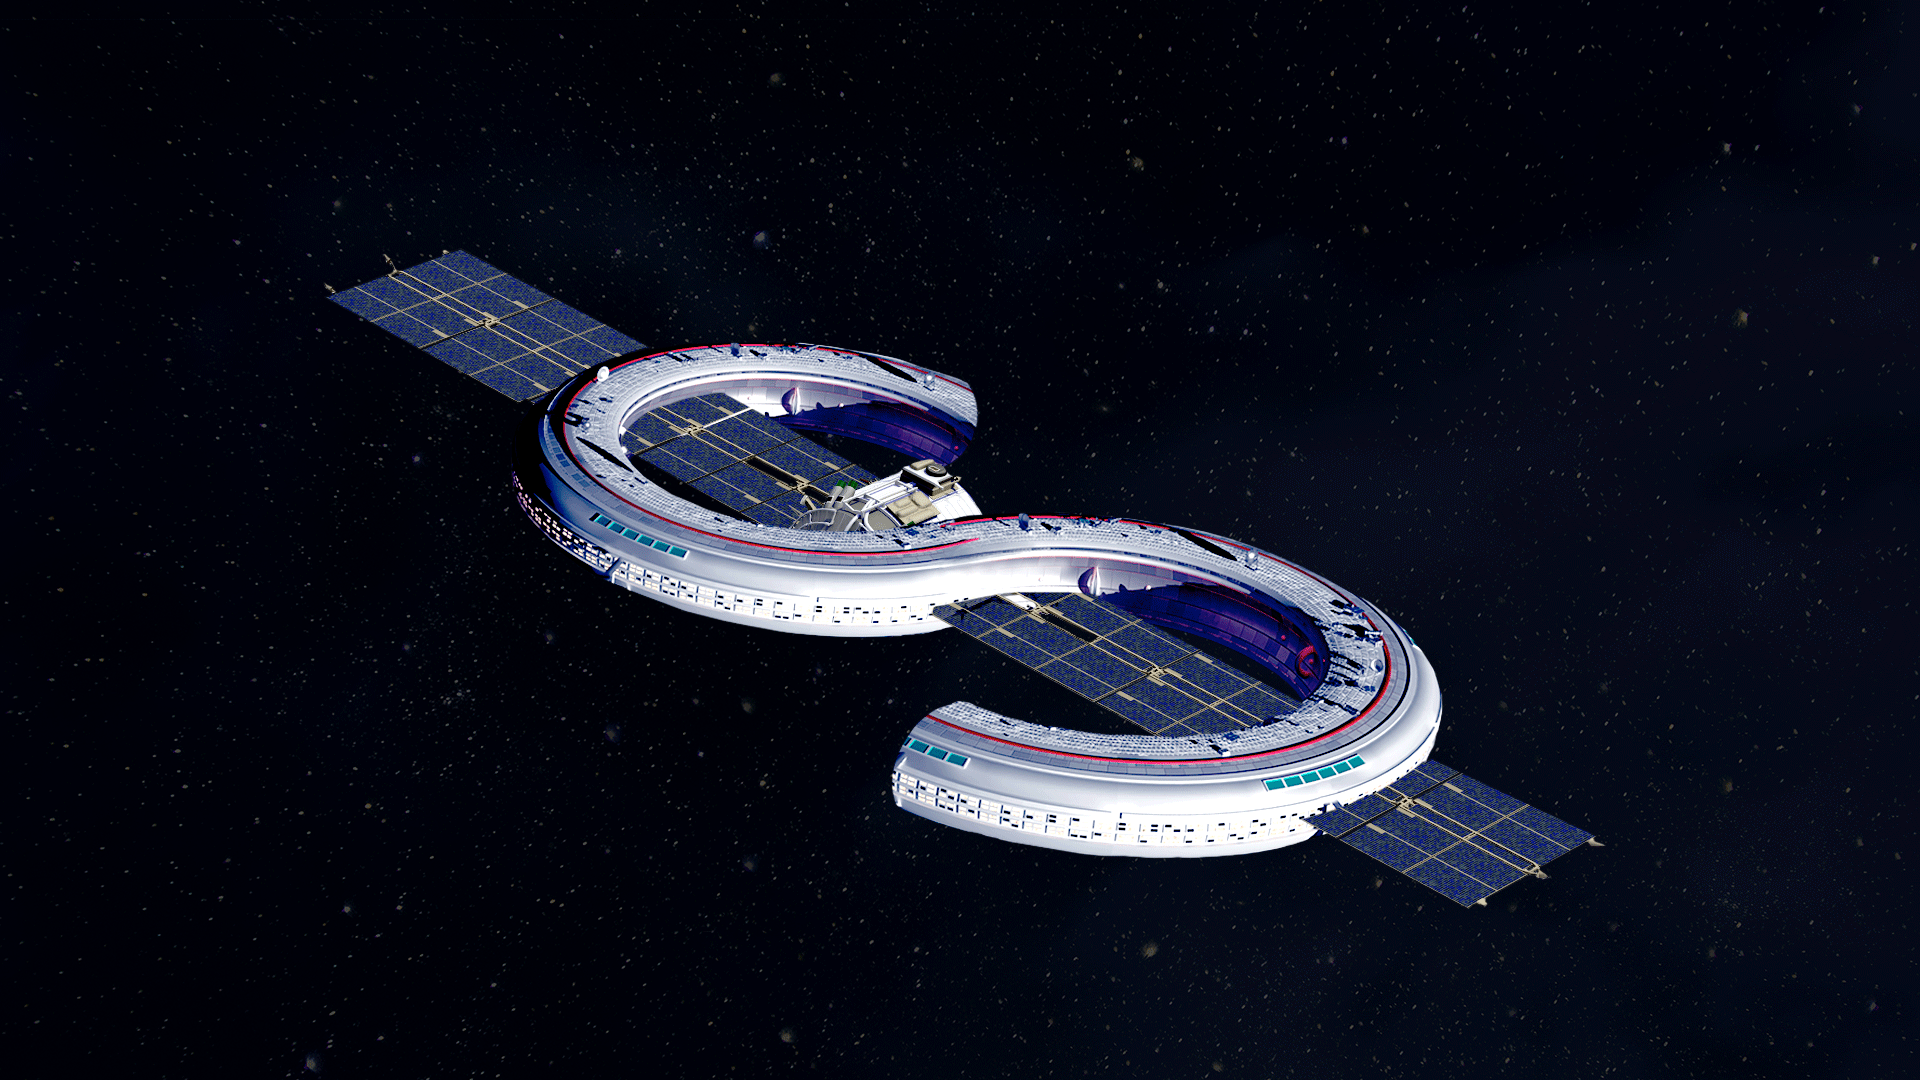 Illustration of a space station that looks like a dollar sign